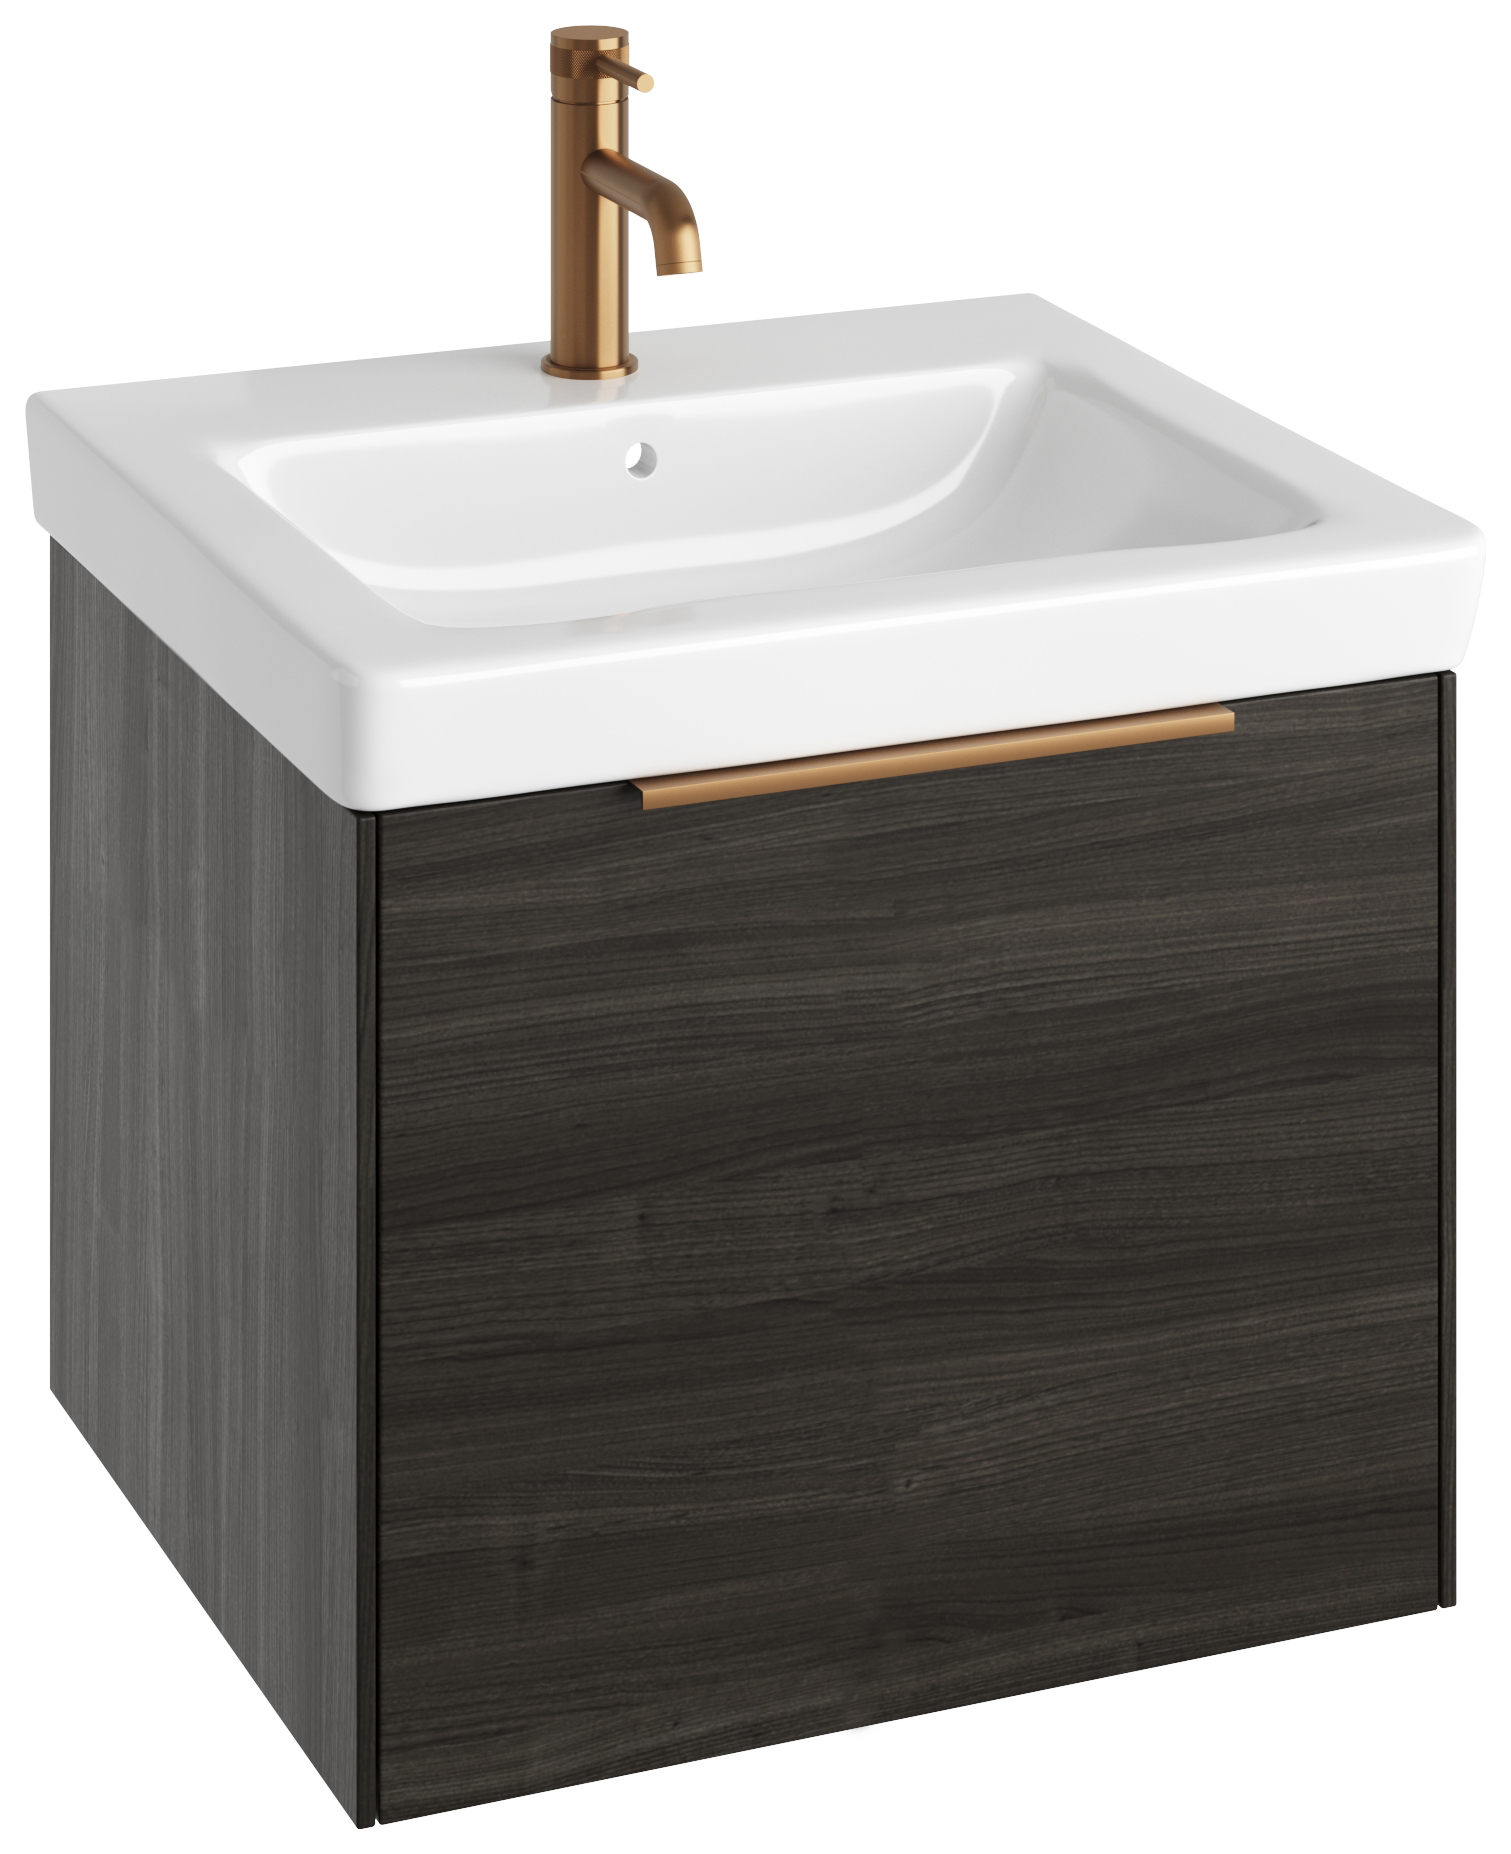 Image of Abacus Concept Lava S3 Vanity Unit & Basin - 600mm